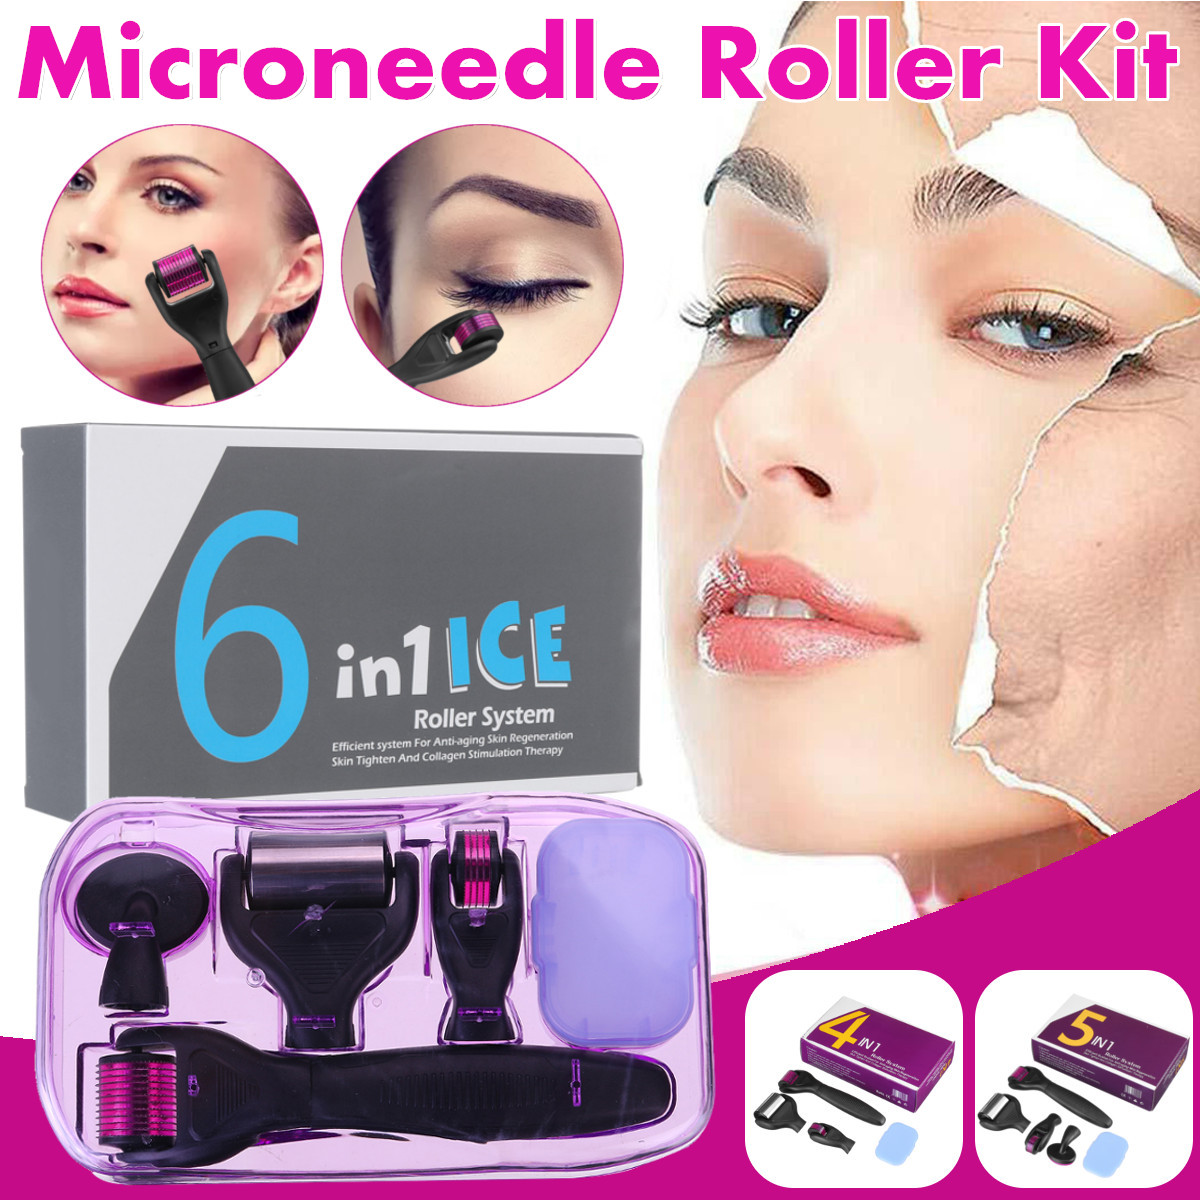 Microneedle-Micro-Needle-Roller-Kit-Therapy-Skin-Care-05-20mm-Anti-aging-Acne-1820421-2